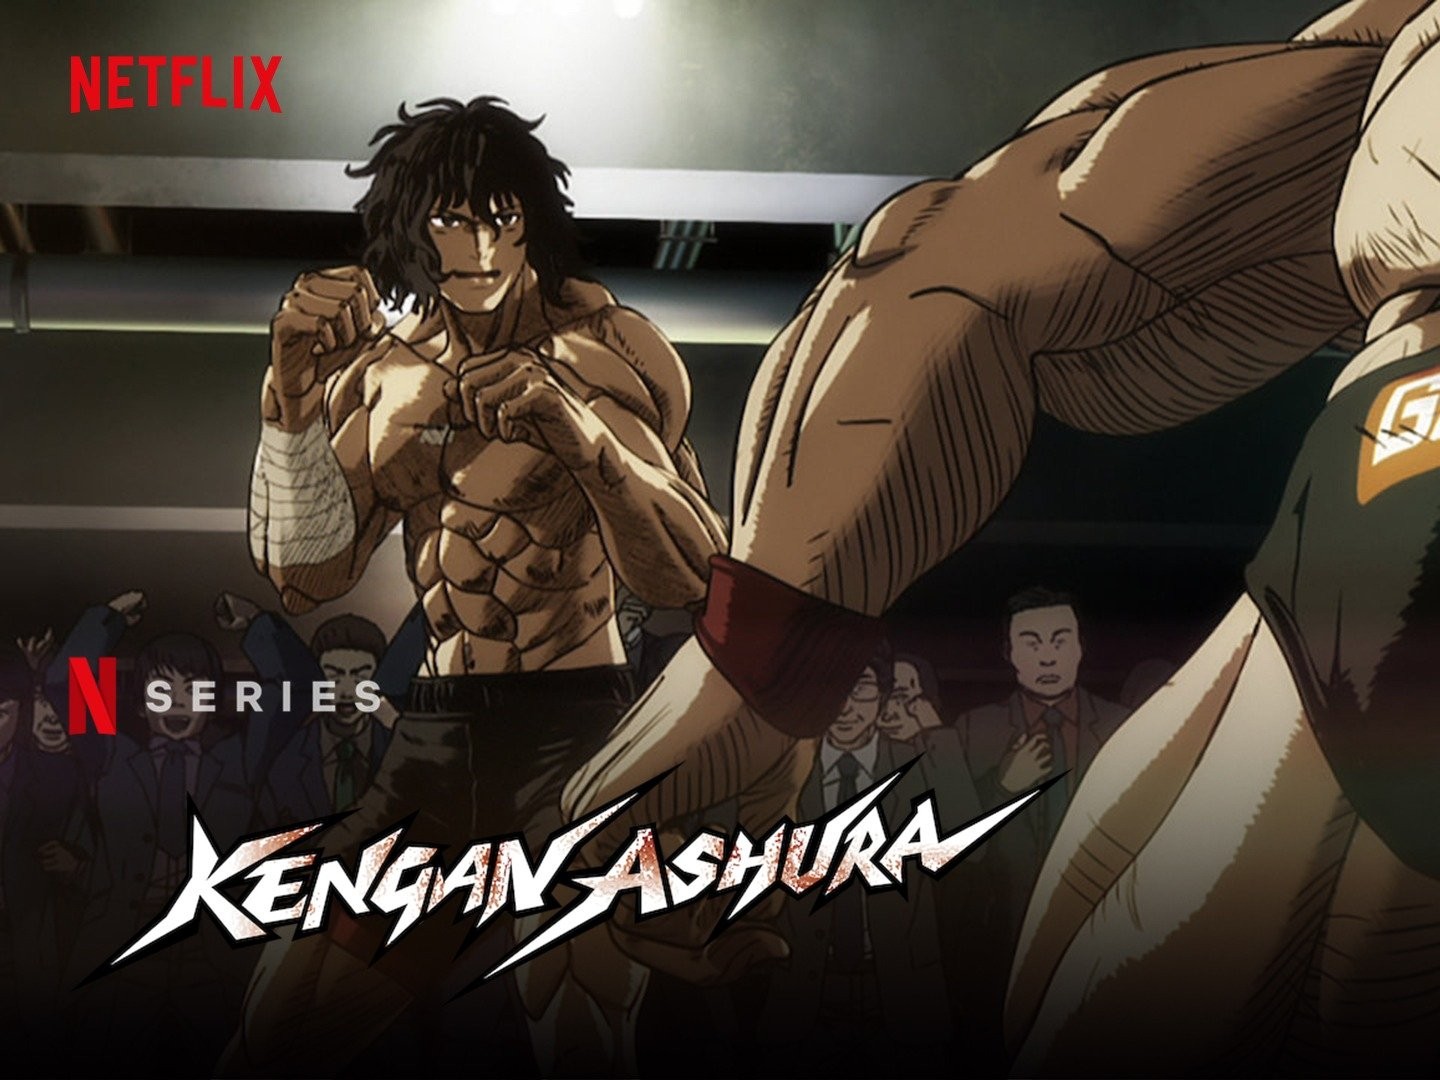 Anime  The Road of Naruto to Kengan Ashura S2: Five anime series to watch  on Netflix and Crunchyroll in September - Telegraph India